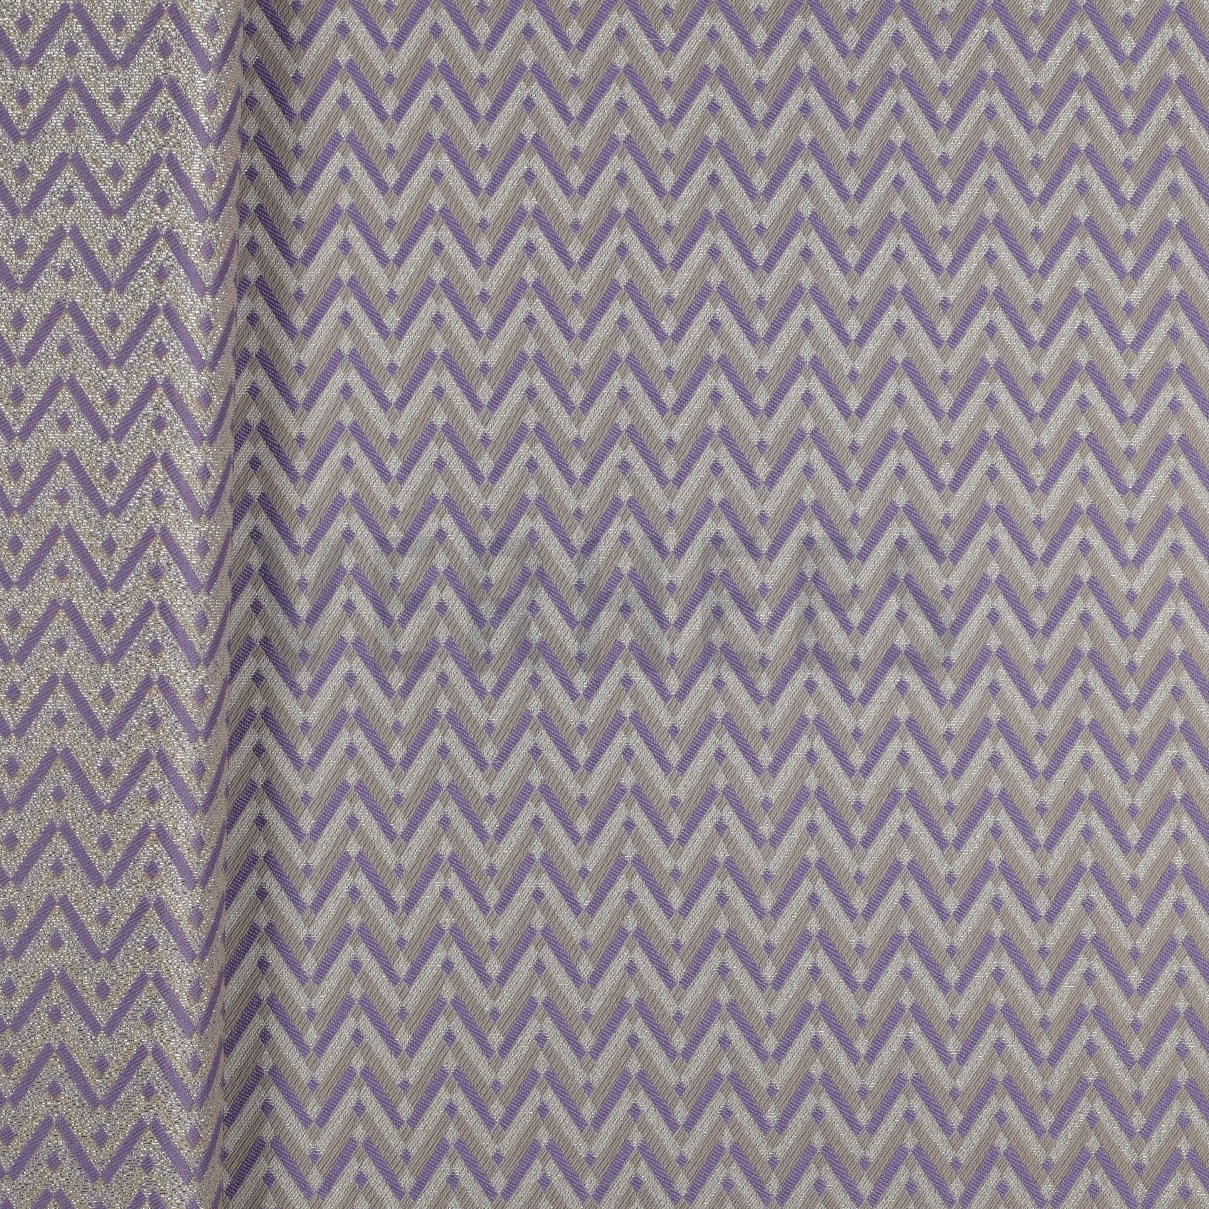 JACQUARD GRAPHIC LILAC BEIGE (high resolution)